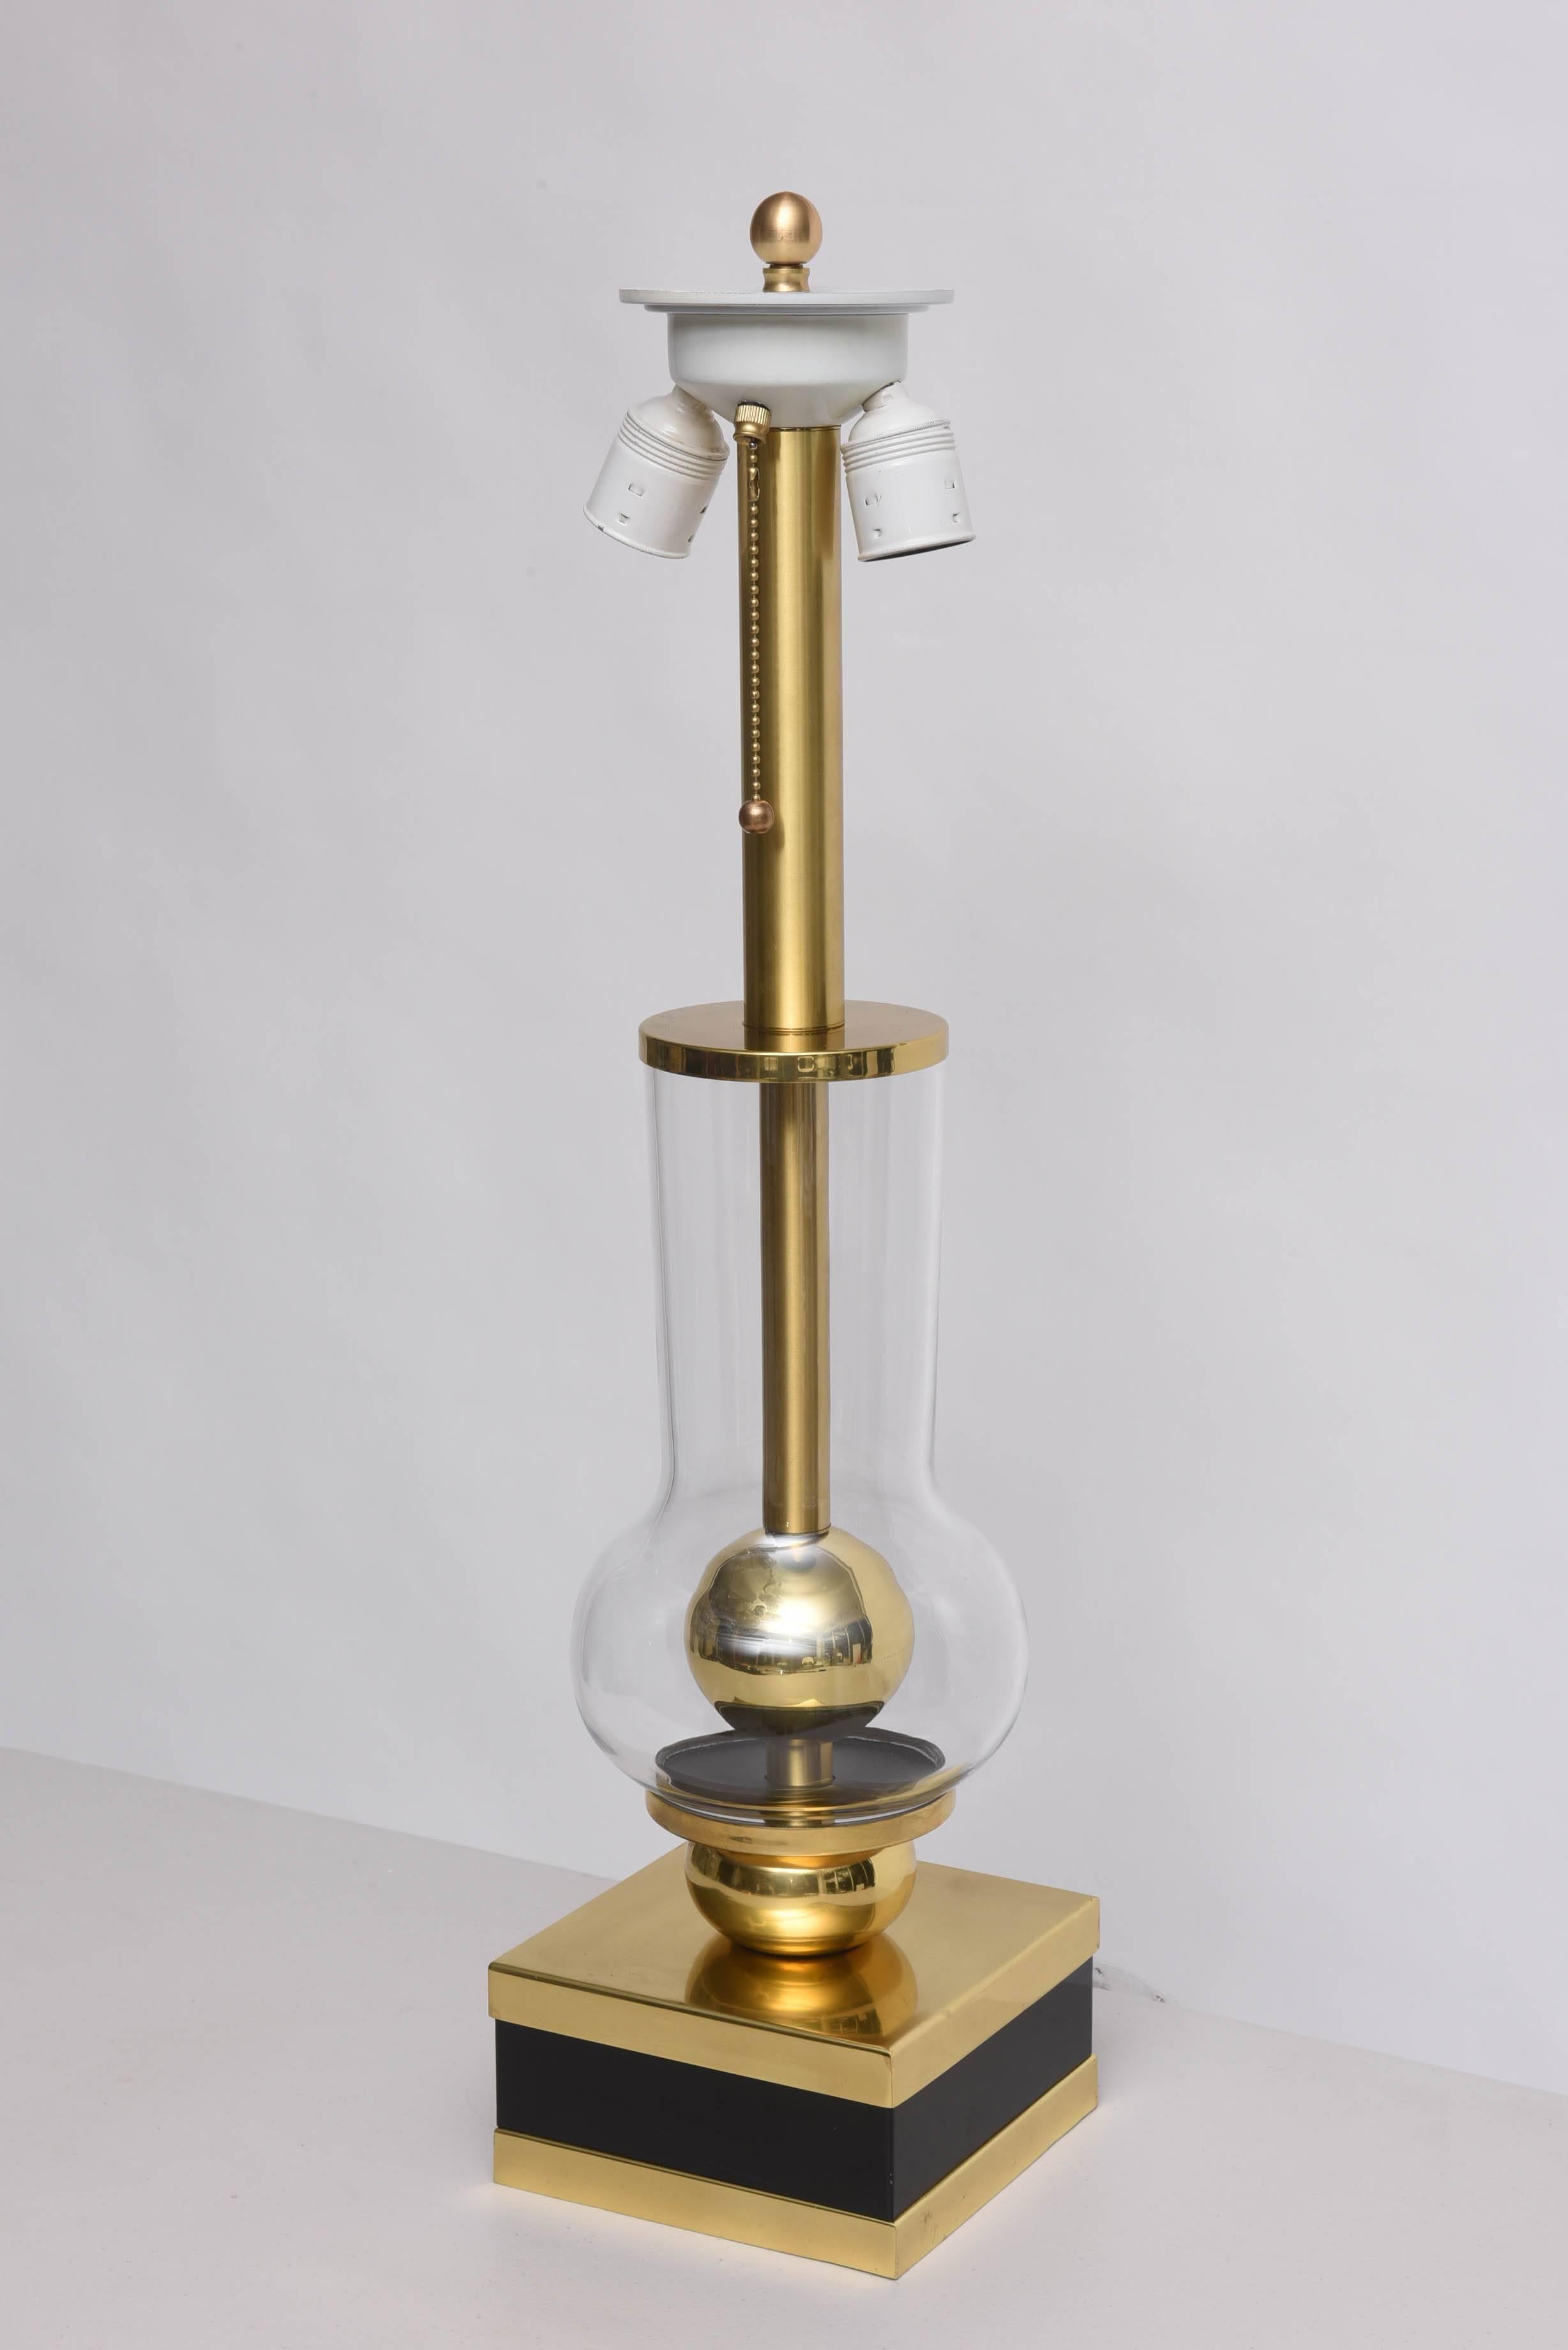 This amazing table lamp is attributed to Studio Willy Rizzo and was created in the 1960s-1970s. The piece is in polished brass with a painted black-band on the base and the clear glass globe encasing a sphere of brass.

Note: The base is 6.50